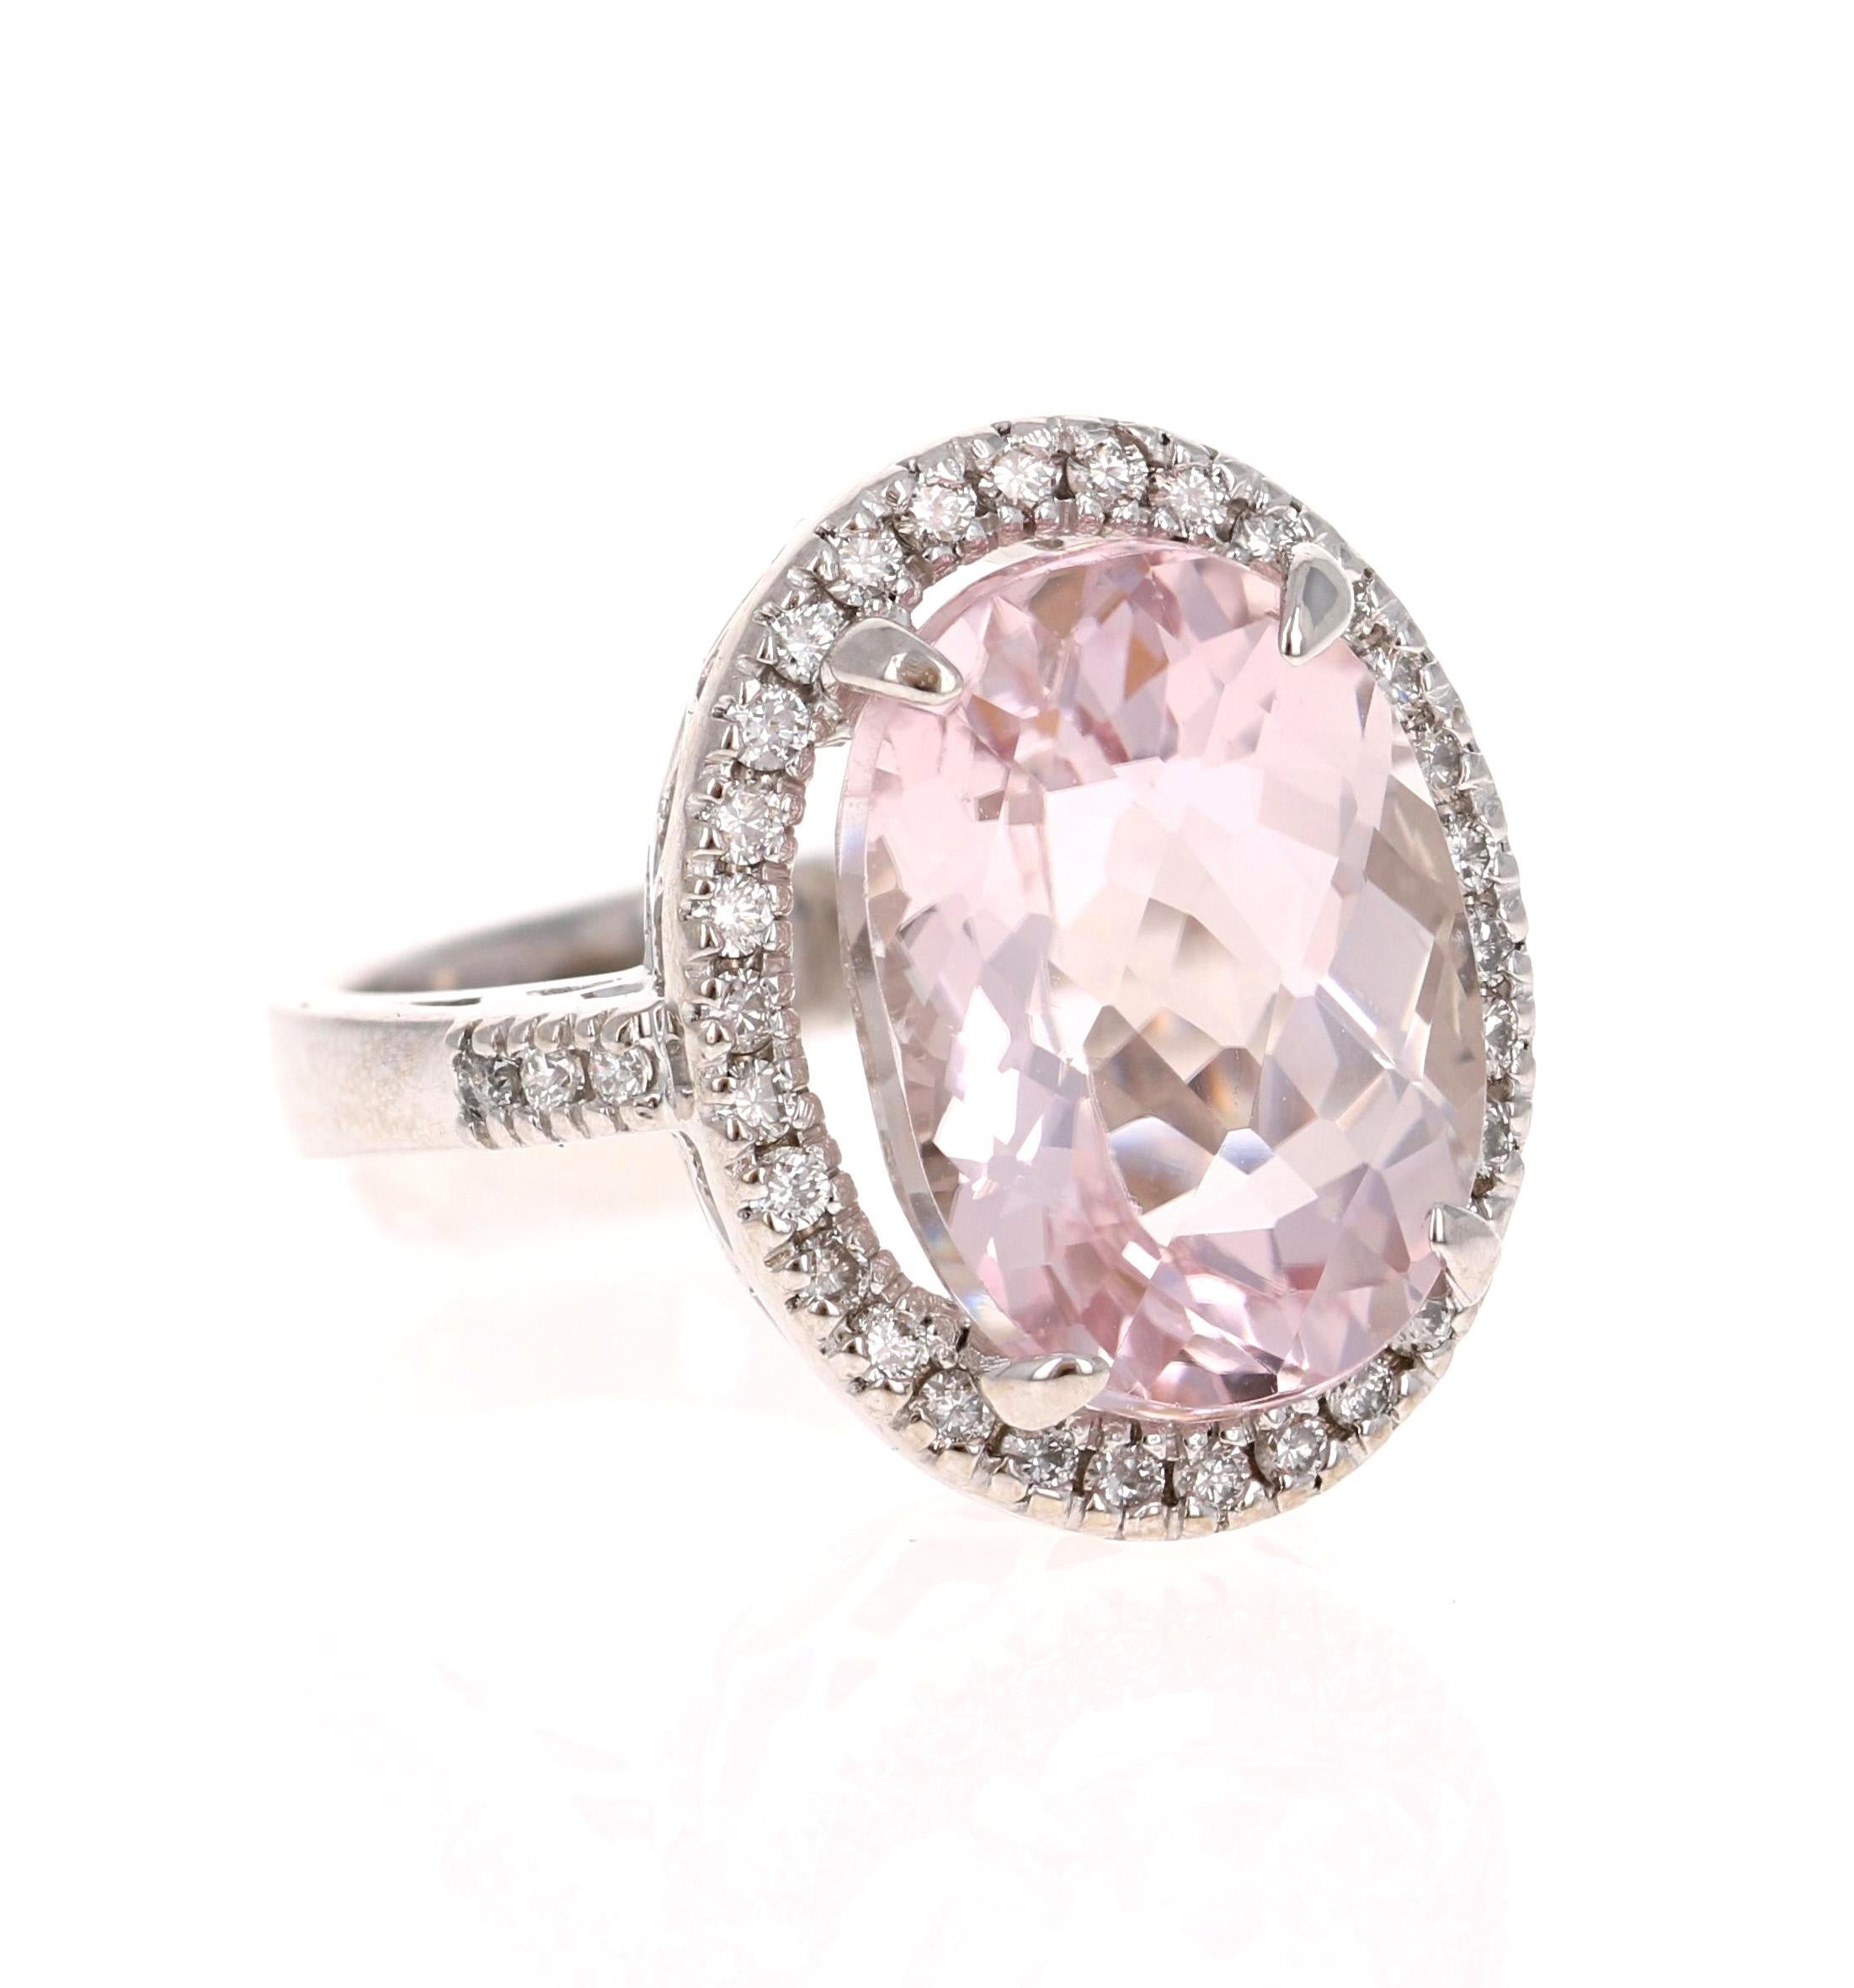 This beautiful piece has a 10.97 carat Oval Cut Kunzite that is set in the center of the ring, it is surrounded by 36 Round Cut Diamonds that weigh 0.53 carats.  The total carat weight of the ring is 11.50 carats. 

The ring is made in 14K White